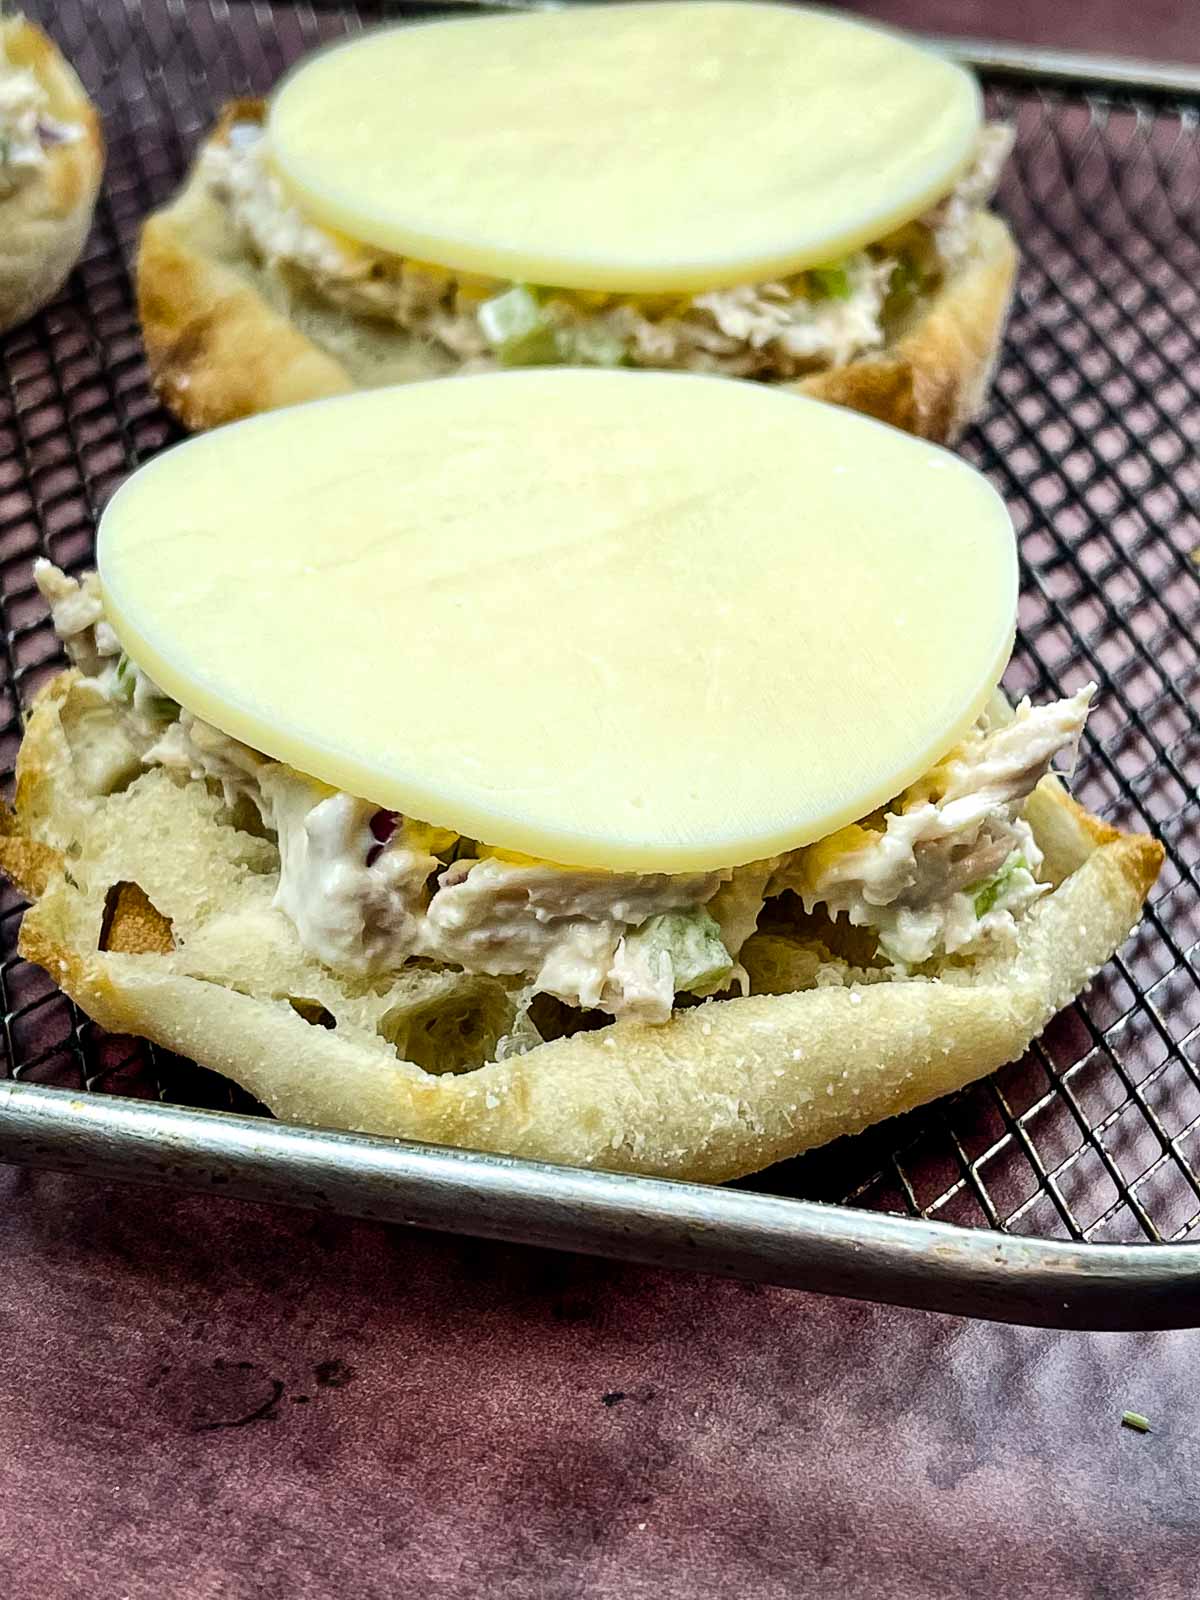 Provolone cheese on top of the open faced tuna melt.